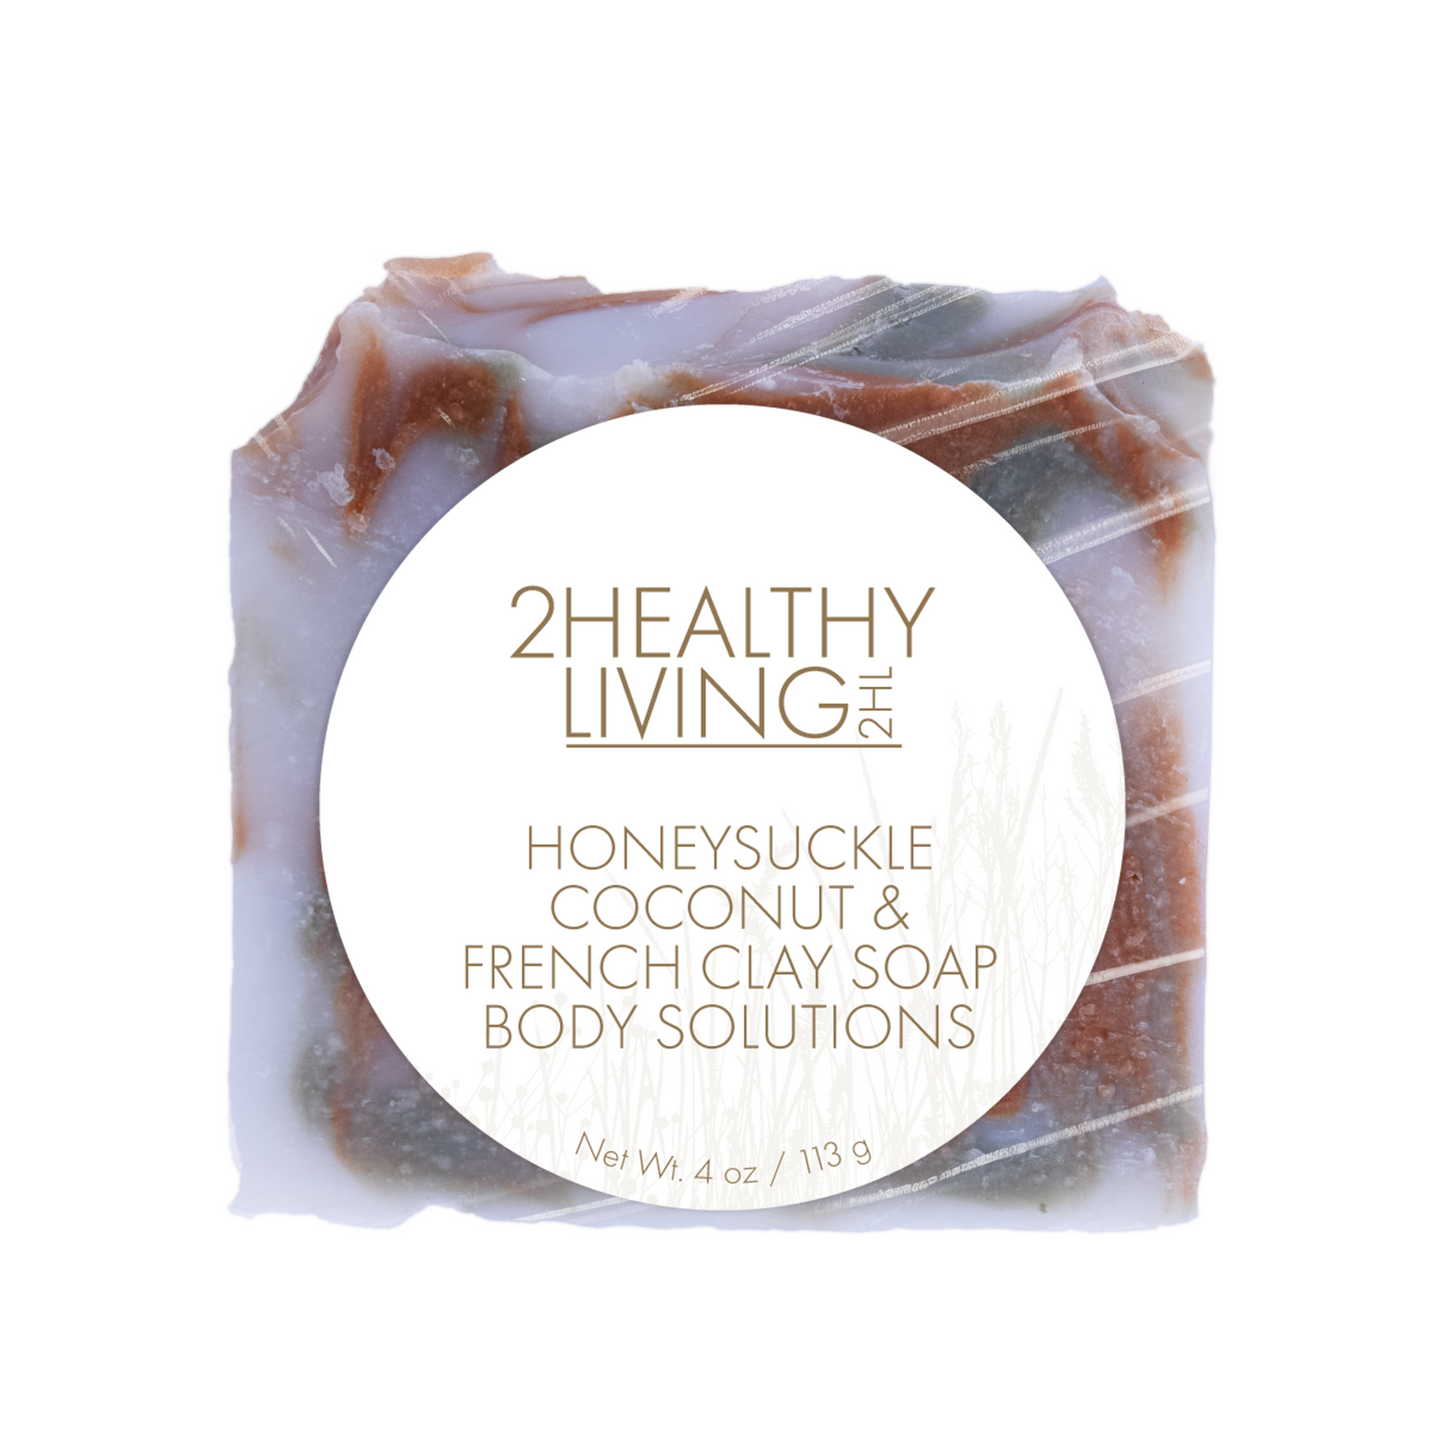 Honeysuckle Coconut & French Clay Soap Body Solutions